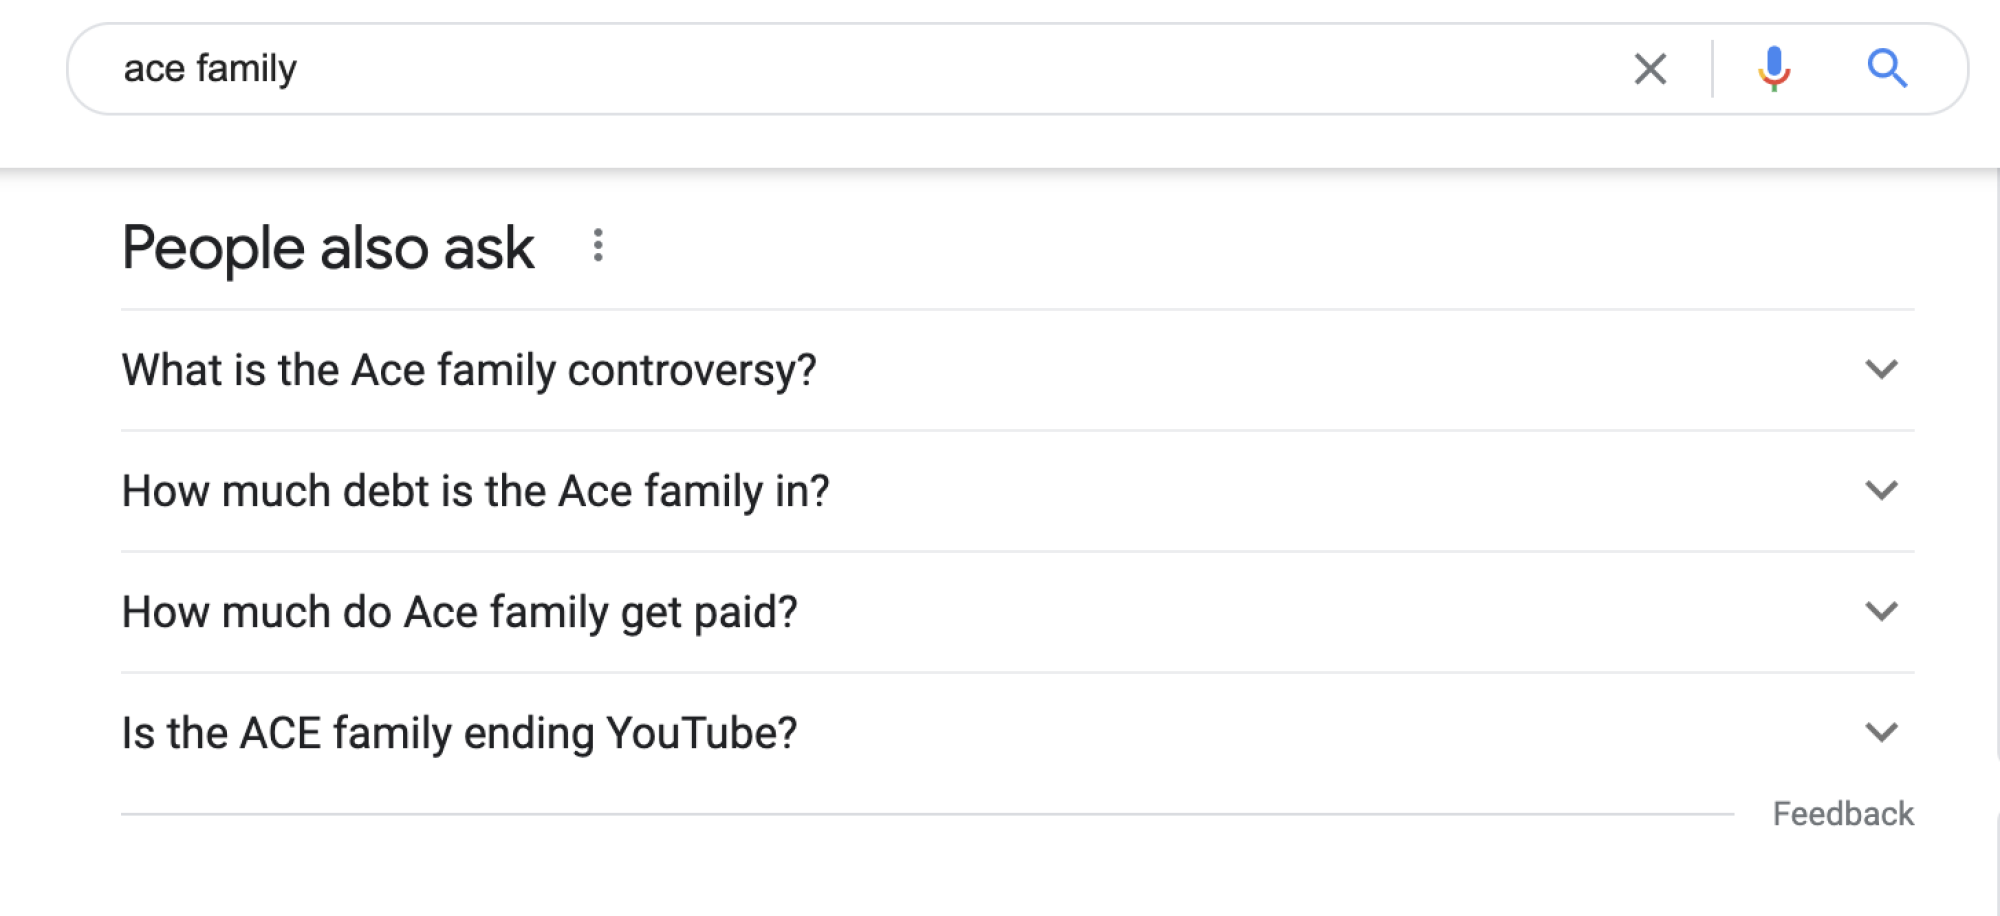 A screenshot of the Google search results page for the ACE family, which includes a snippet asking "What is the ACE Family controversy?" and "How much debt is the ACE Family in?"